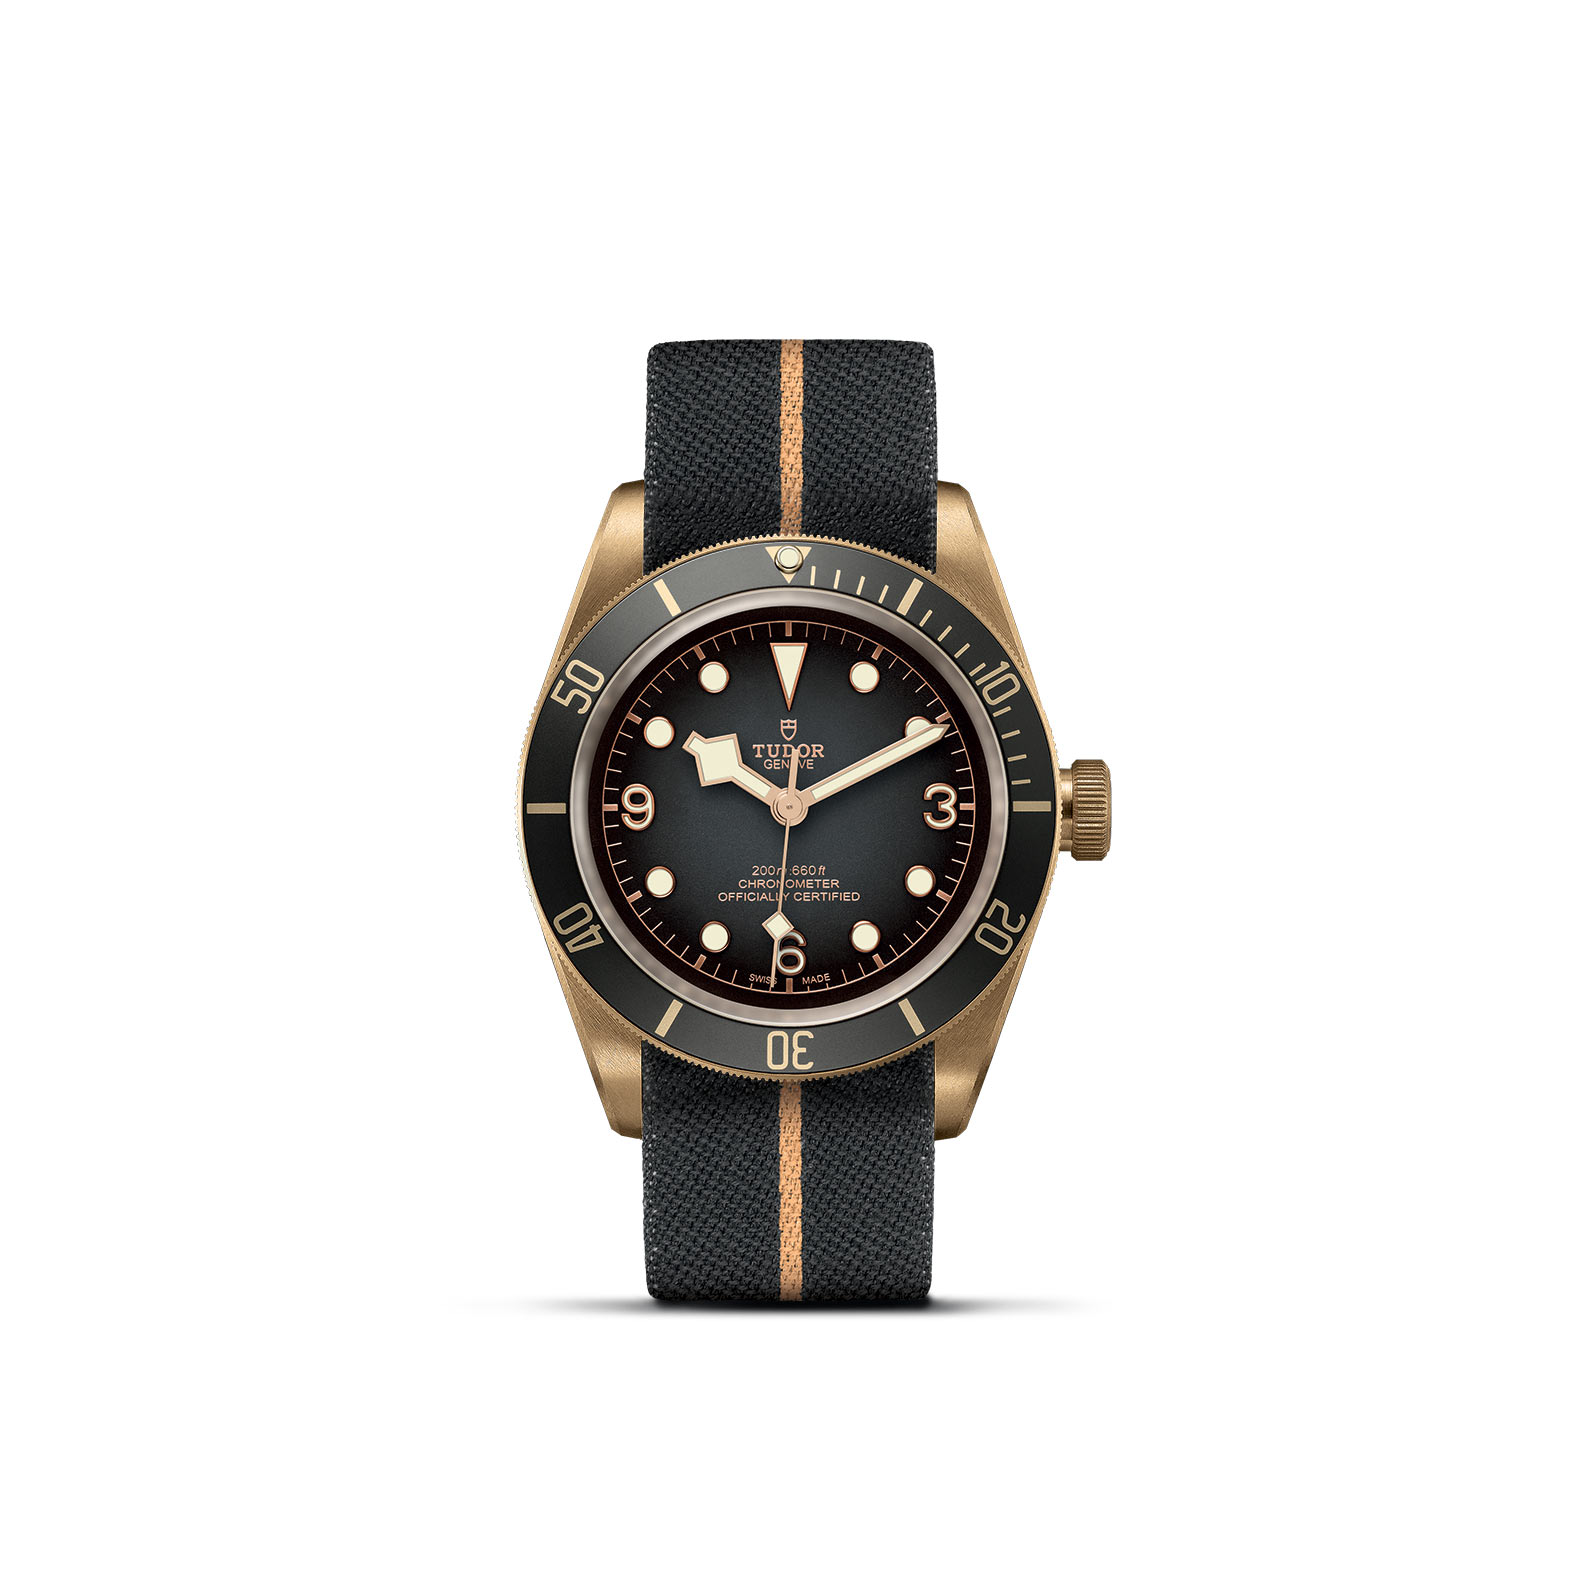 TUDOR BLACK BAY BRONZE standing upright, highlighting its classic design against a white background.